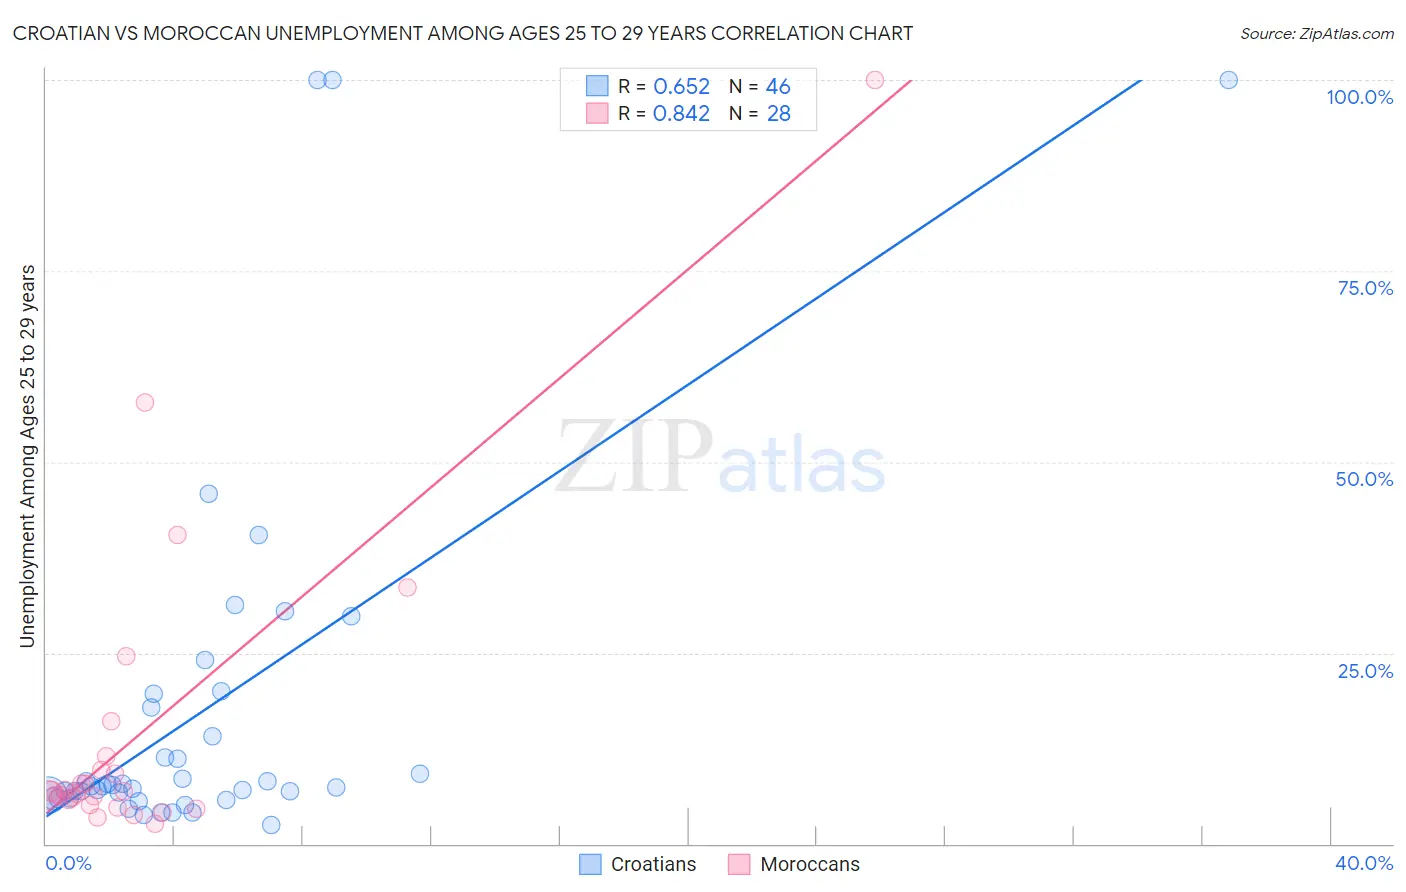 Croatian vs Moroccan Unemployment Among Ages 25 to 29 years